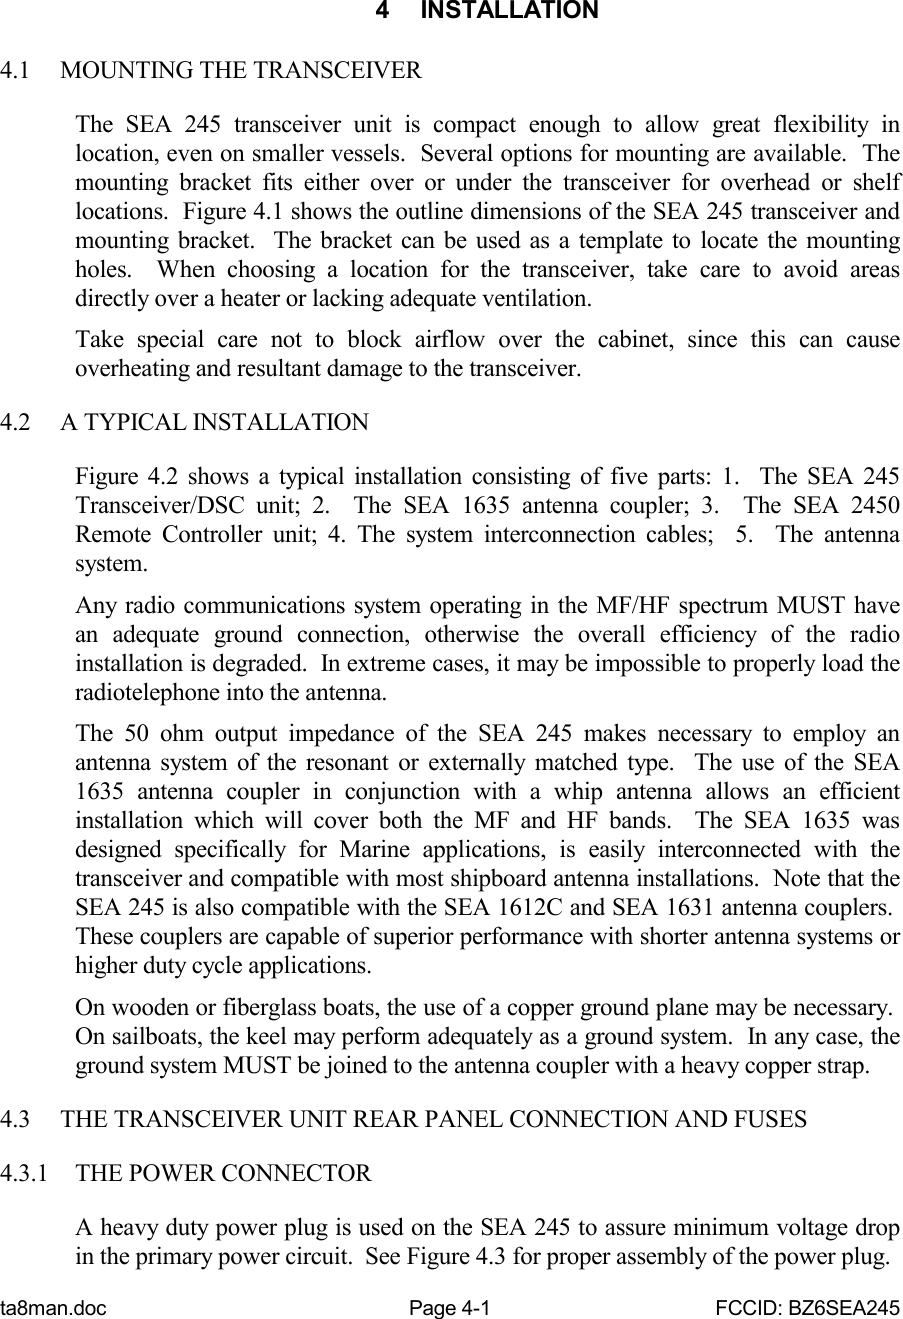 ta8man.doc Page 4-1 FCCID: BZ6SEA2454 INSTALLATION4.1 MOUNTING THE TRANSCEIVERThe SEA 245 transceiver unit is compact enough to allow great flexibility inlocation, even on smaller vessels.  Several options for mounting are available.  Themounting bracket fits either over or under the transceiver for overhead or shelflocations.  Figure 4.1 shows the outline dimensions of the SEA 245 transceiver andmounting bracket.  The bracket can be used as a template to locate the mountingholes.  When choosing a location for the transceiver, take care to avoid areasdirectly over a heater or lacking adequate ventilation.Take special care not to block airflow over the cabinet, since this can causeoverheating and resultant damage to the transceiver.4.2 A TYPICAL INSTALLATIONFigure 4.2 shows a typical installation consisting of five parts: 1.  The SEA 245Transceiver/DSC unit; 2.  The SEA 1635 antenna coupler; 3.  The SEA 2450Remote Controller unit; 4. The system interconnection cables;  5.  The antennasystem.Any radio communications system operating in the MF/HF spectrum MUST havean adequate ground connection, otherwise the overall efficiency of the radioinstallation is degraded.  In extreme cases, it may be impossible to properly load theradiotelephone into the antenna.The 50 ohm output impedance of the SEA 245 makes necessary to employ anantenna system of the resonant or externally matched type.  The use of the SEA1635 antenna coupler in conjunction with a whip antenna allows an efficientinstallation which will cover both the MF and HF bands.  The SEA 1635 wasdesigned specifically for Marine applications, is easily interconnected with thetransceiver and compatible with most shipboard antenna installations.  Note that theSEA 245 is also compatible with the SEA 1612C and SEA 1631 antenna couplers. These couplers are capable of superior performance with shorter antenna systems orhigher duty cycle applications.On wooden or fiberglass boats, the use of a copper ground plane may be necessary. On sailboats, the keel may perform adequately as a ground system.  In any case, theground system MUST be joined to the antenna coupler with a heavy copper strap.4.3 THE TRANSCEIVER UNIT REAR PANEL CONNECTION AND FUSES4.3.1 THE POWER CONNECTORA heavy duty power plug is used on the SEA 245 to assure minimum voltage dropin the primary power circuit.  See Figure 4.3 for proper assembly of the power plug.